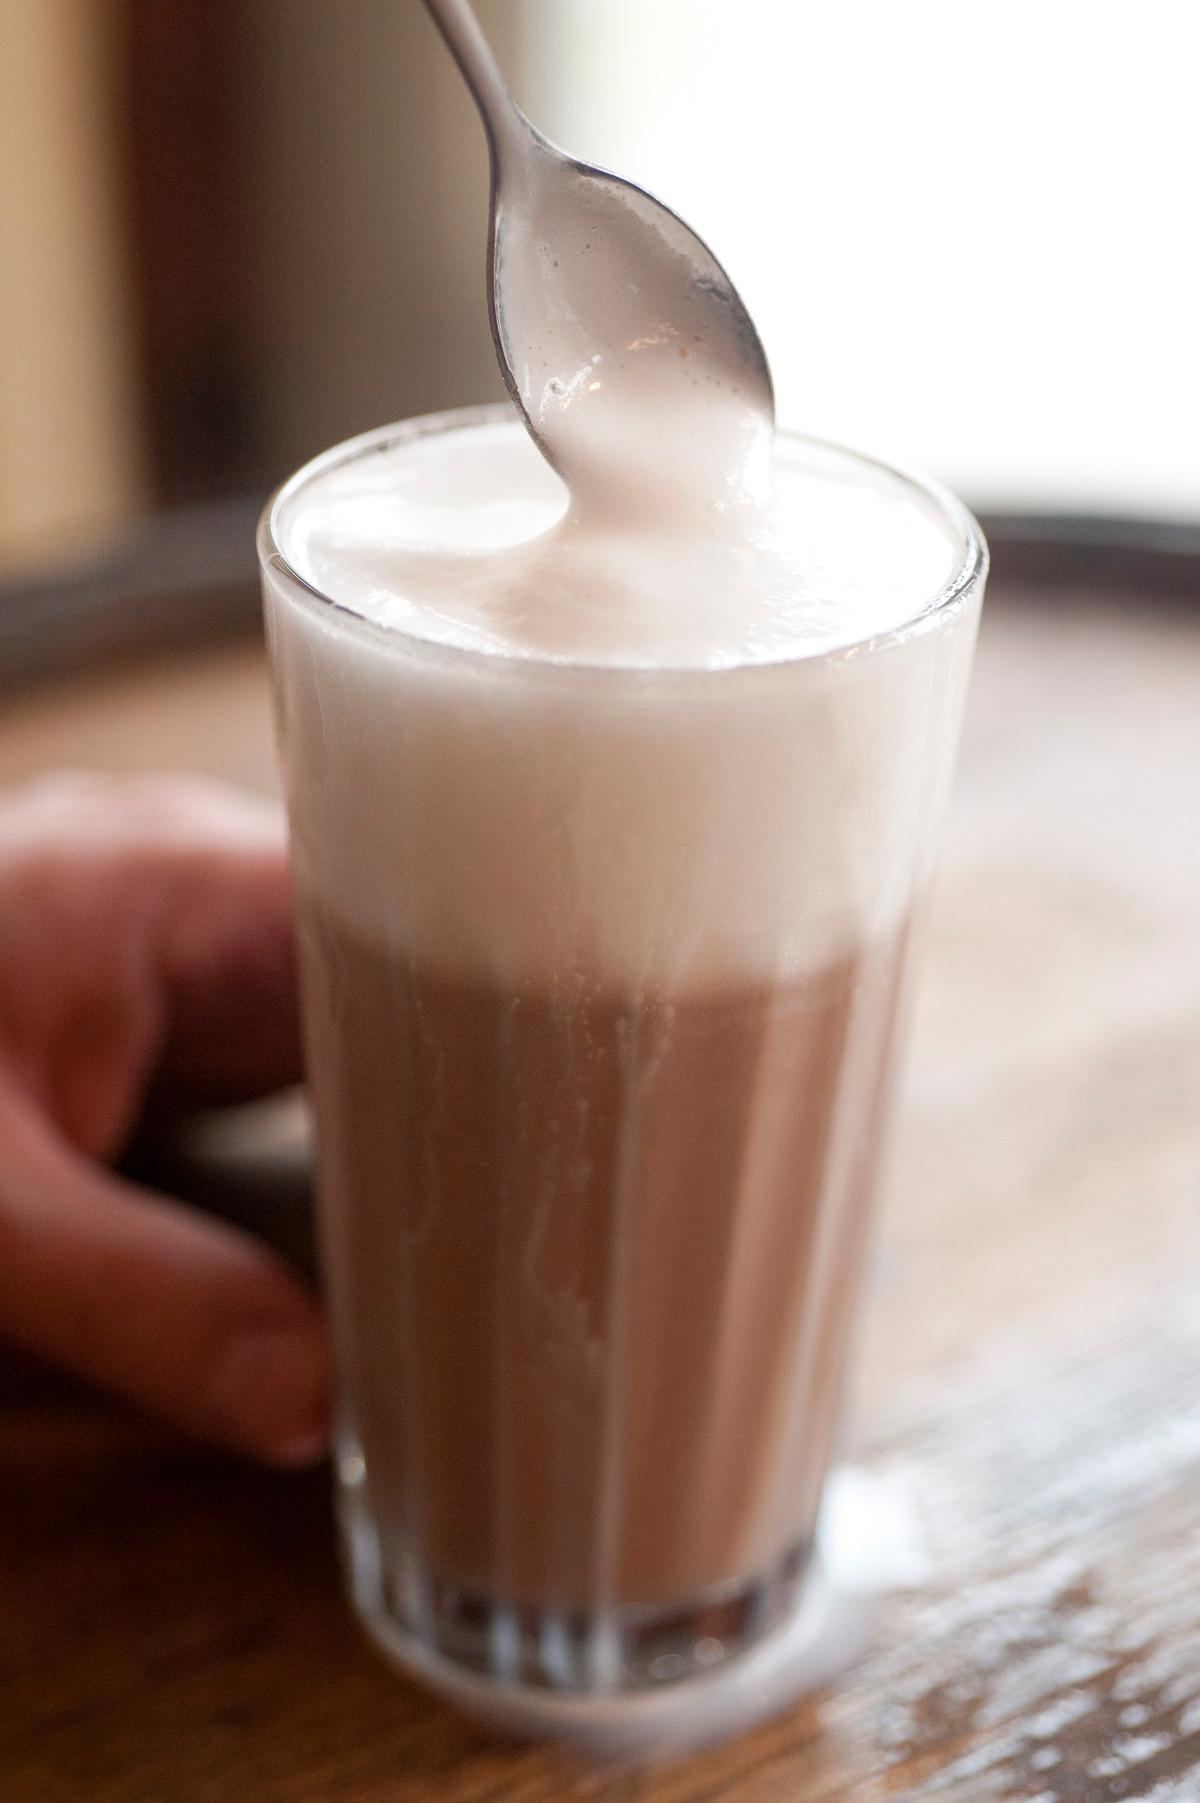 An egg cream, an iconic New York drink, from Brooklyn Farmacy and Soda Fountain. Containing neither eggs nor cream, it's essentially a chocolate seltzer. (Courtesy of Brooklyn Farmacy and Soda Fountain)